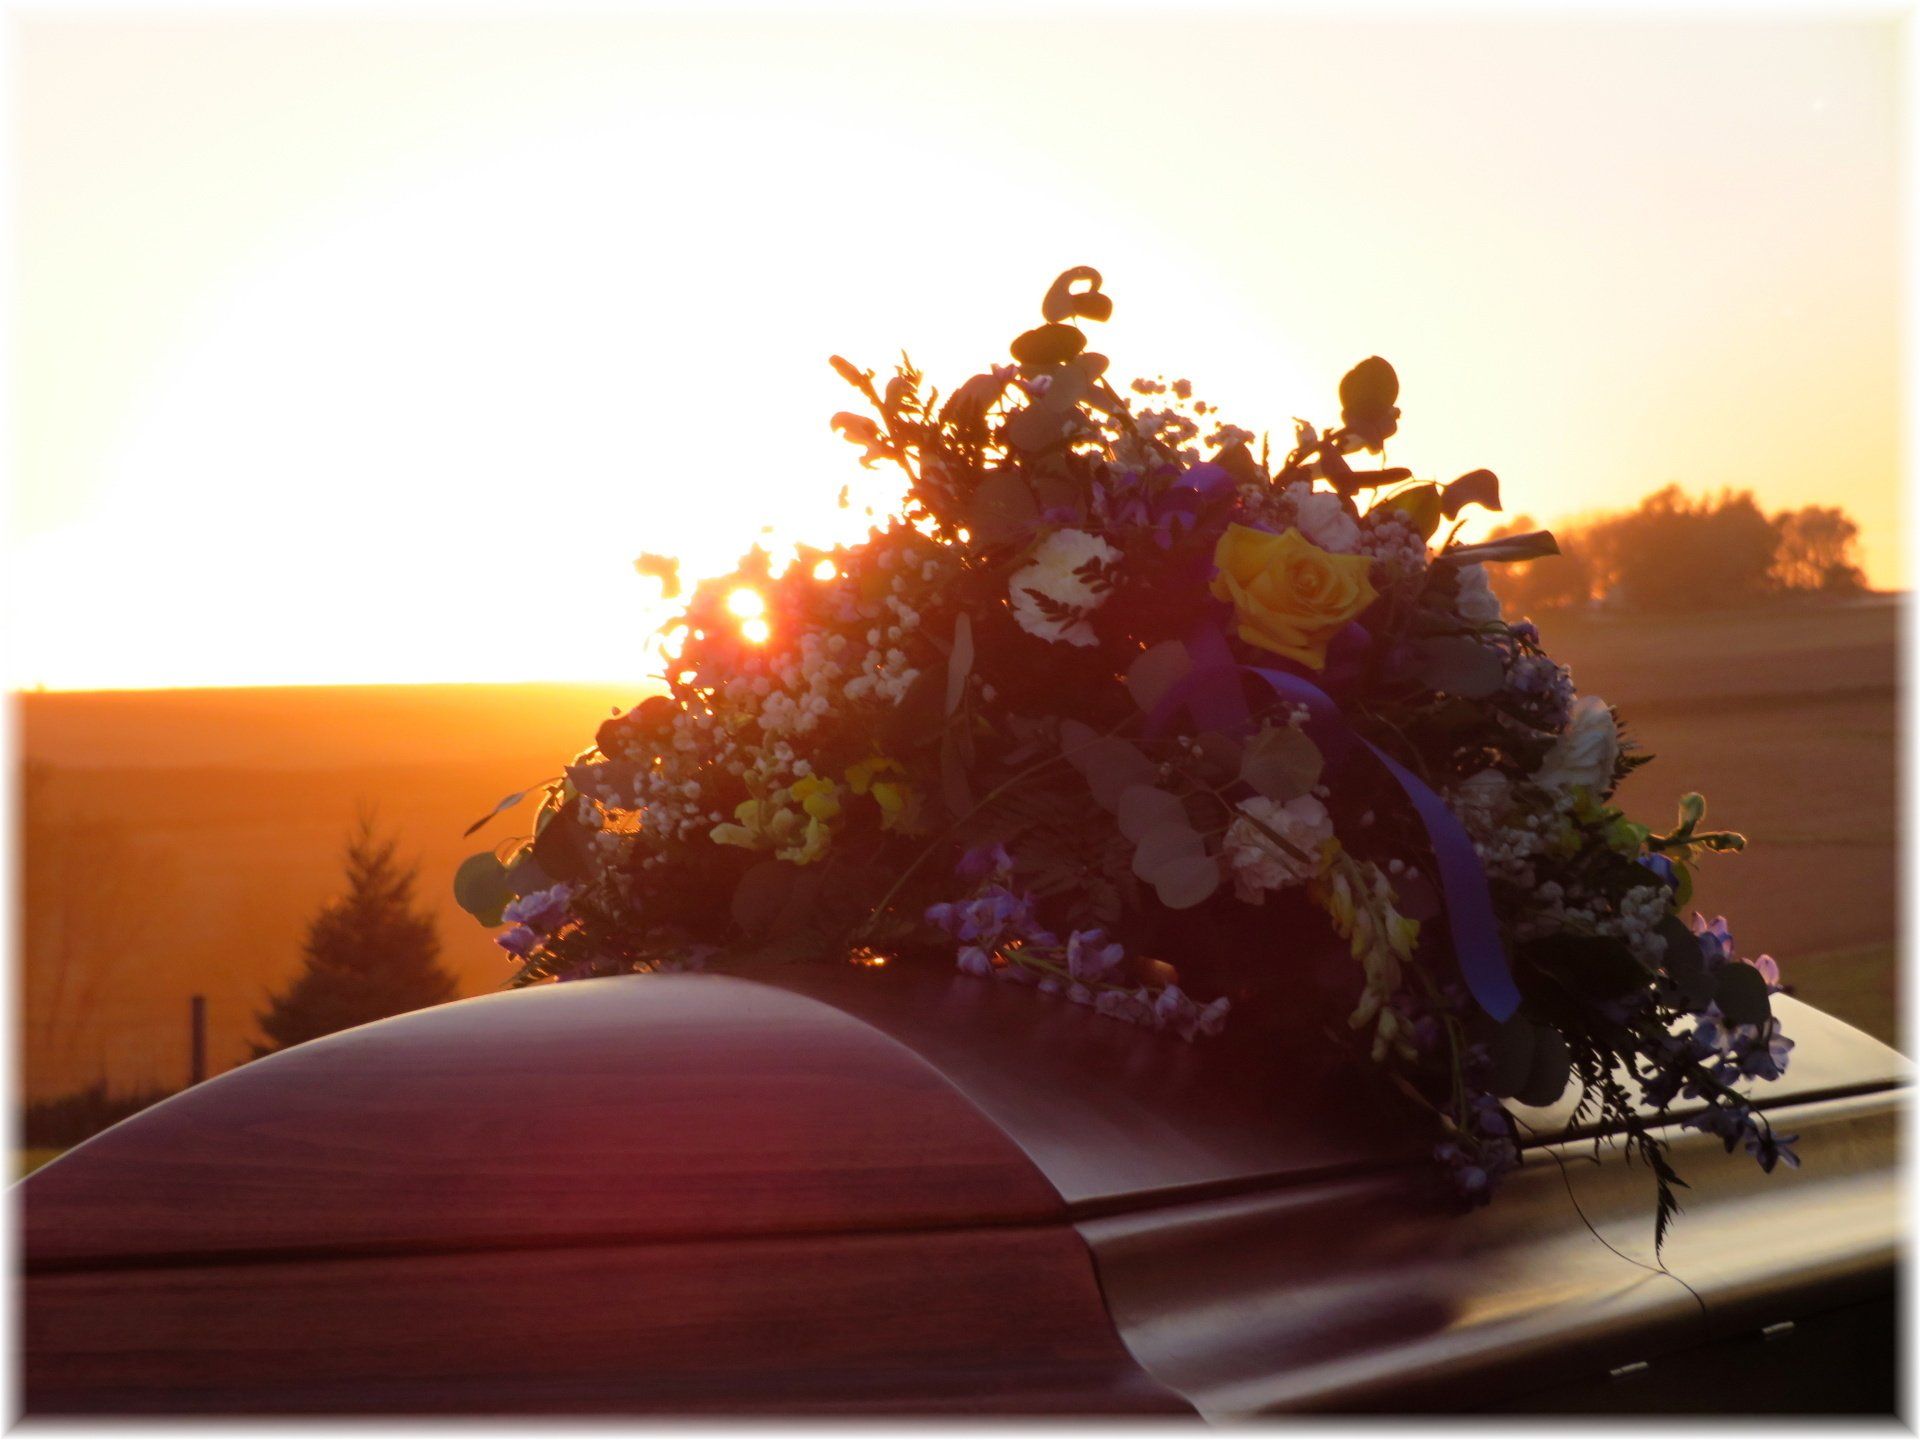 Funeral Home — A Casket with Bunch of Flowers Above in Atlantic, IA